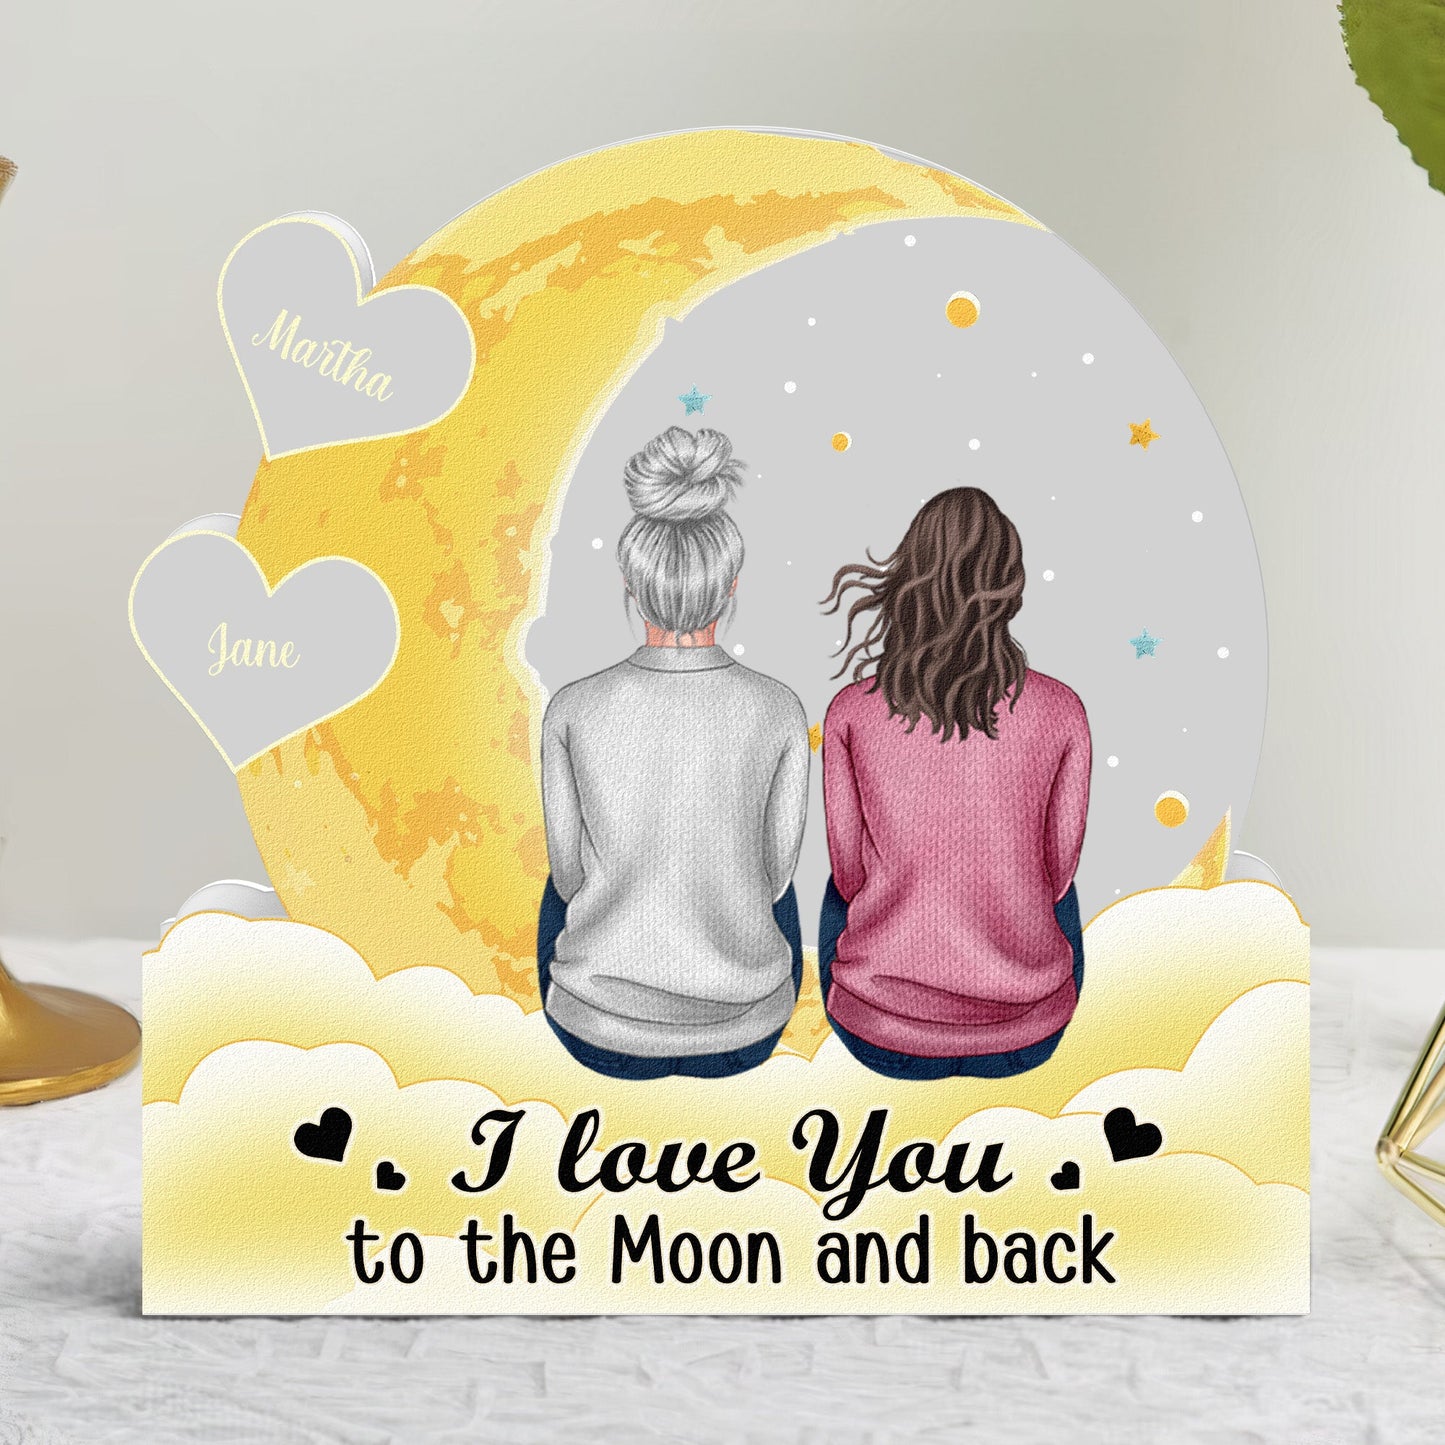 Love You To The Moon And Back - Personalized Light Box